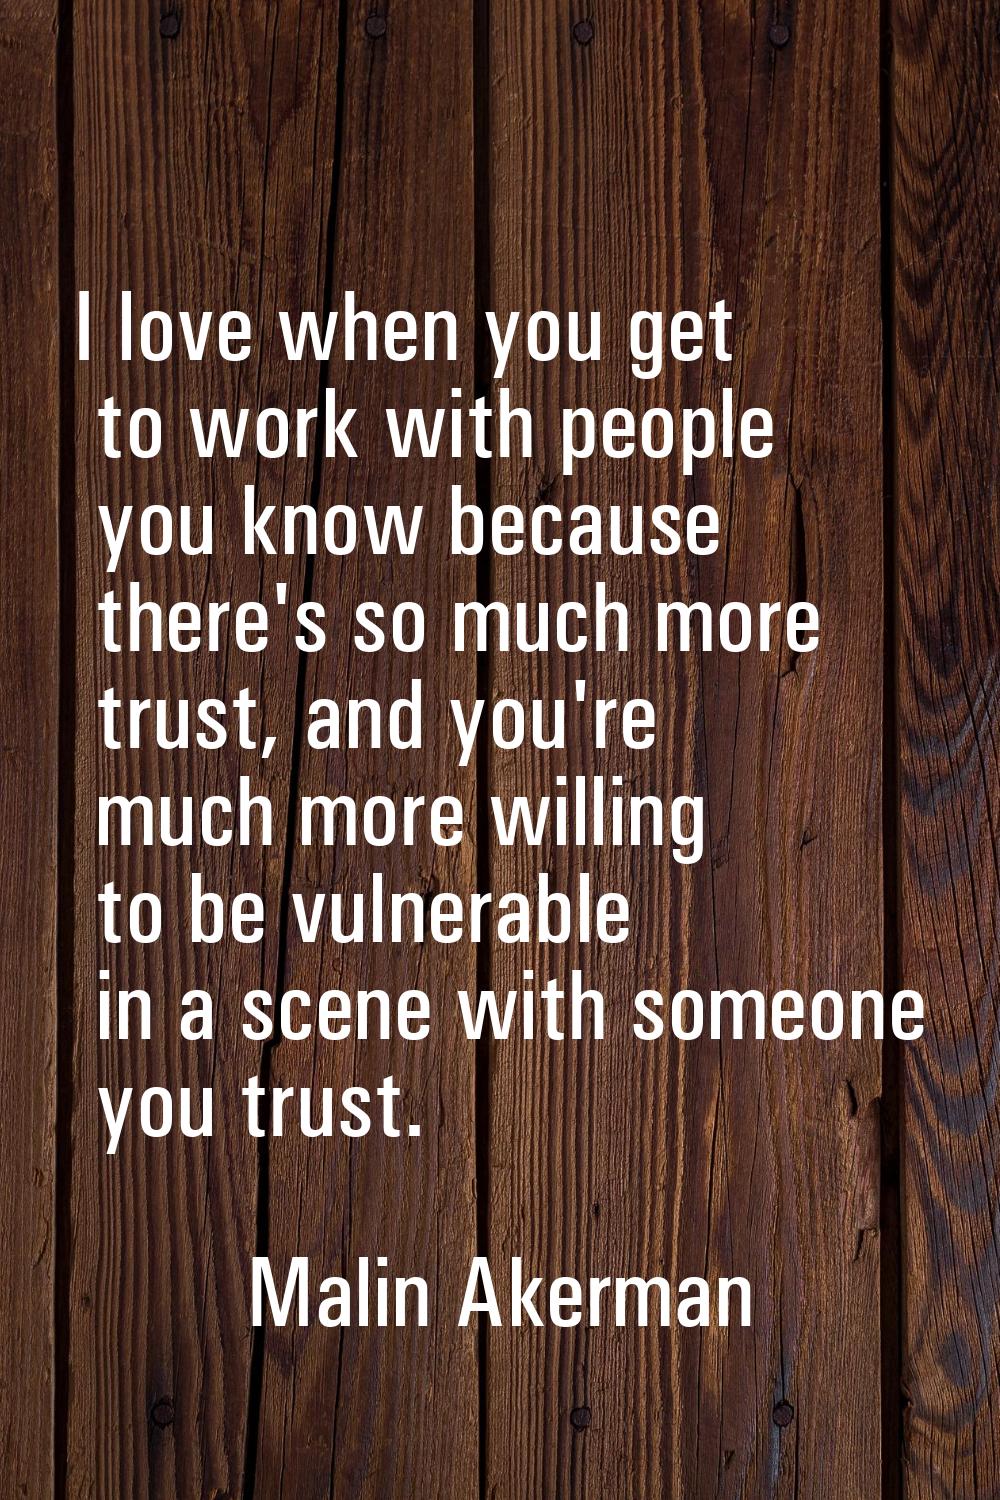 I love when you get to work with people you know because there's so much more trust, and you're muc